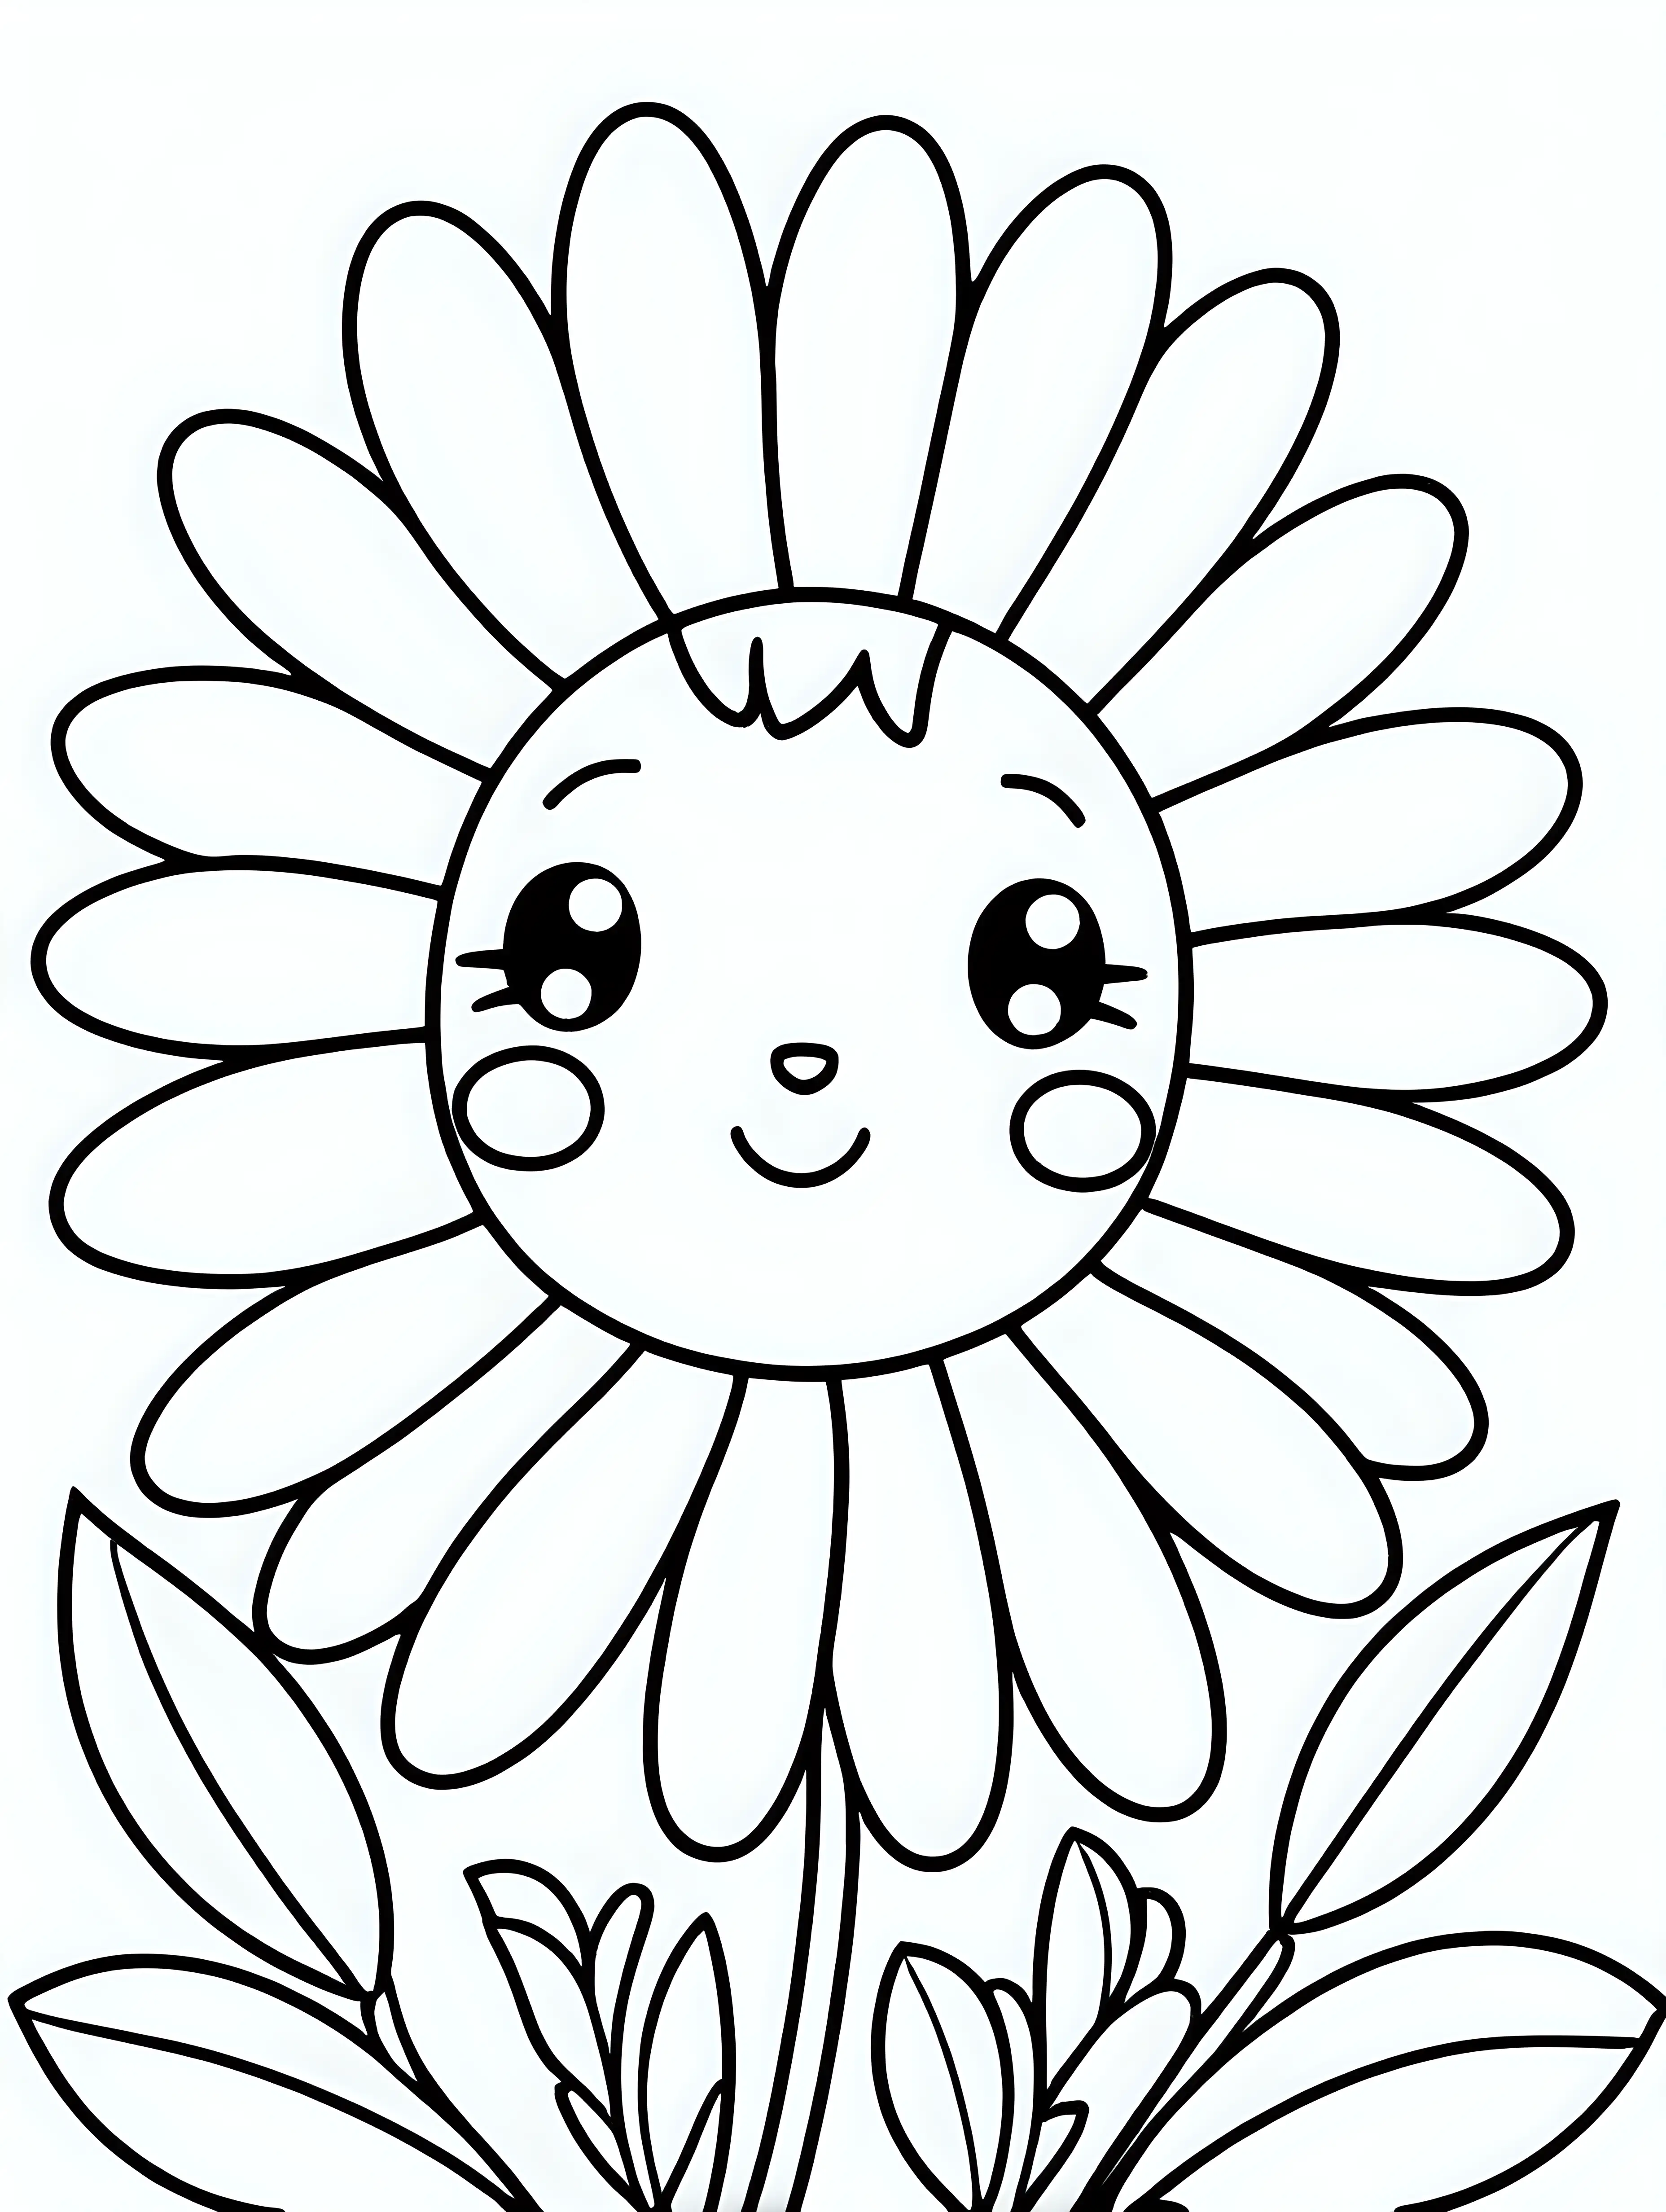 Adorable Kawaii Daisy Coloring Page for Kids Cartoon Style Fun